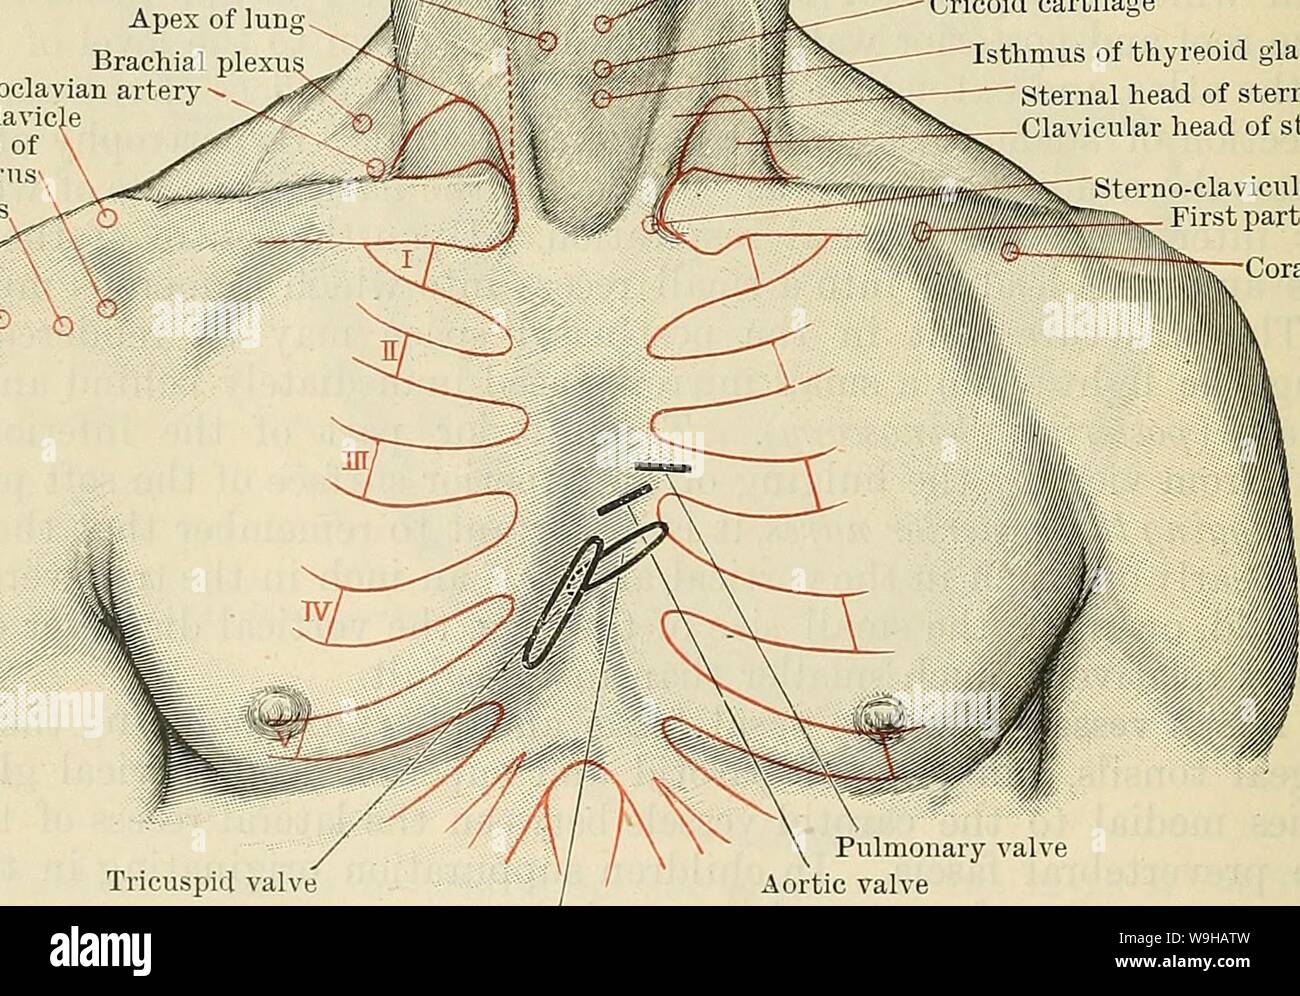 Archive image from page 1419 of Cunningham's Text-book of anatomy (1914). Cunningham's Text-book of anatomy  cunninghamstextb00cunn Year: 1914 ( Anterior belly of digastric Hyoid bone Thyreoid cartilage (pomum Adami) Crico-thyreoid membrane External jugular vein Cricoid cartilage Isthmus of thyreoid gland Sternal head of sterno-mastoid Clavicular head of sterno-mastoid Sterno-clavicular articulation First part axillary artery SiliV 'Coracoid process    Tricuspid valve Pulmonary valve Aortic valve Mitral valve Fig. 1086.—Anterior Aspect of Neck and Shoulders. anterior jugular veins, along with Stock Photo